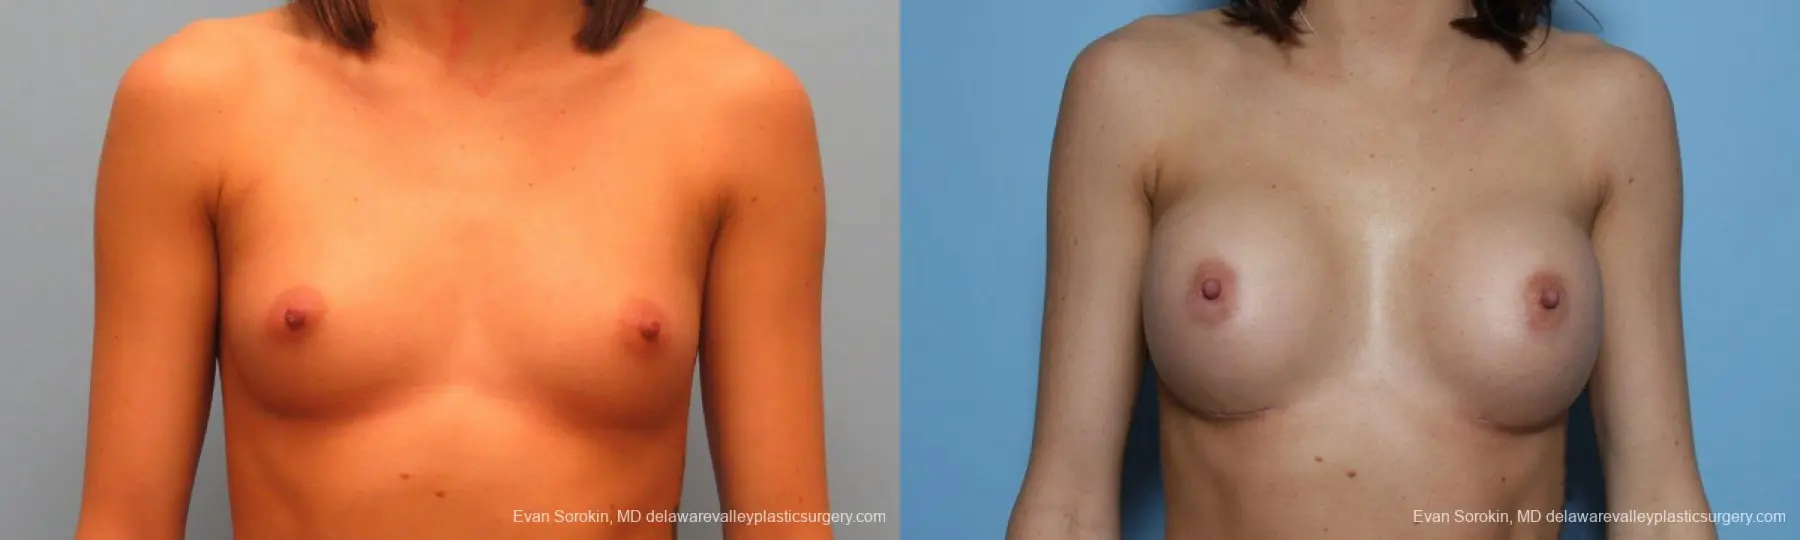 Philadelphia Breast Augmentation 9421 - Before and After 1